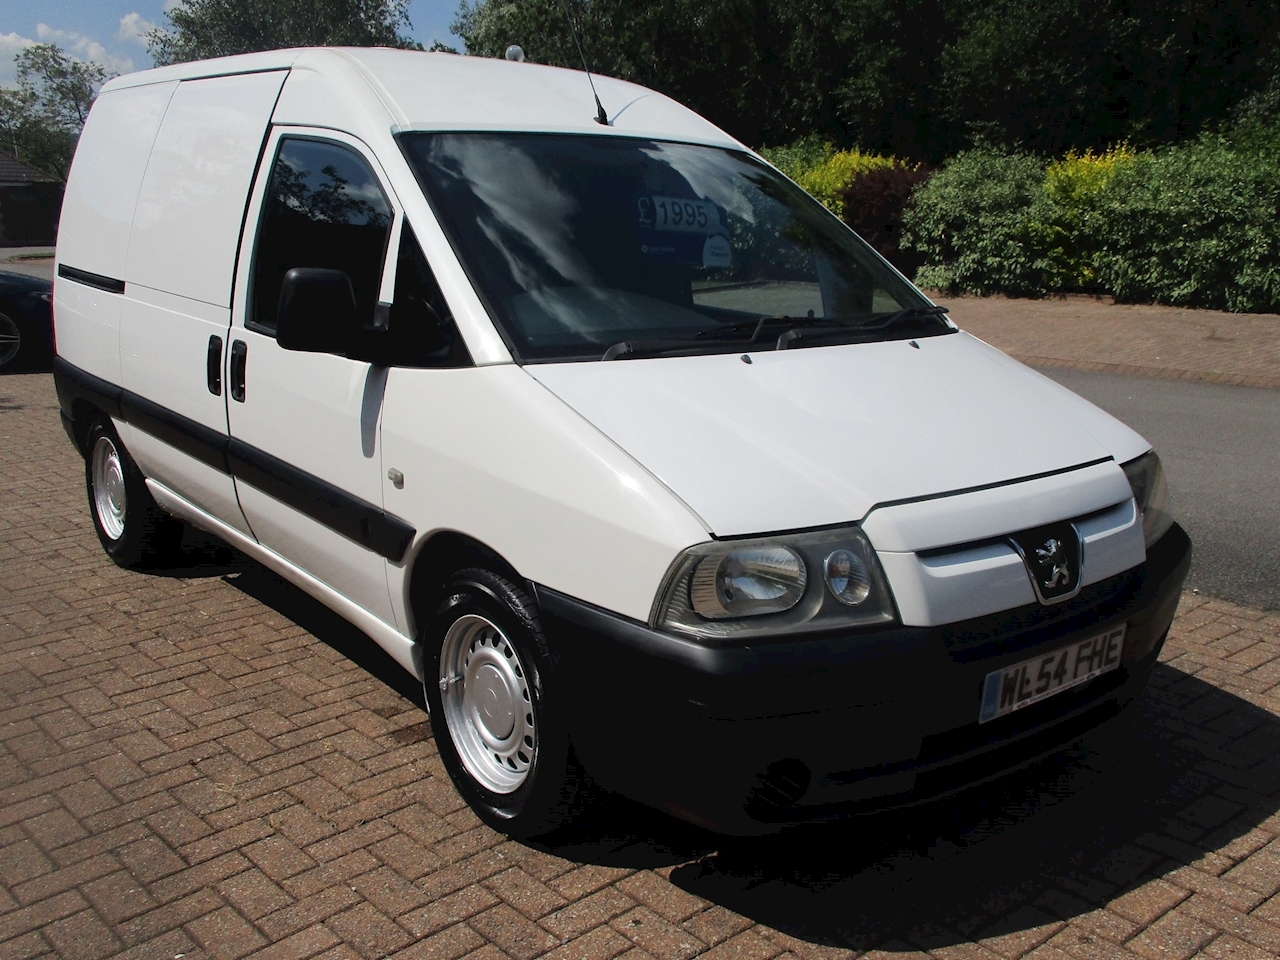 2004 Peugeot Expert, The Peugeot Expert was one of the vans…